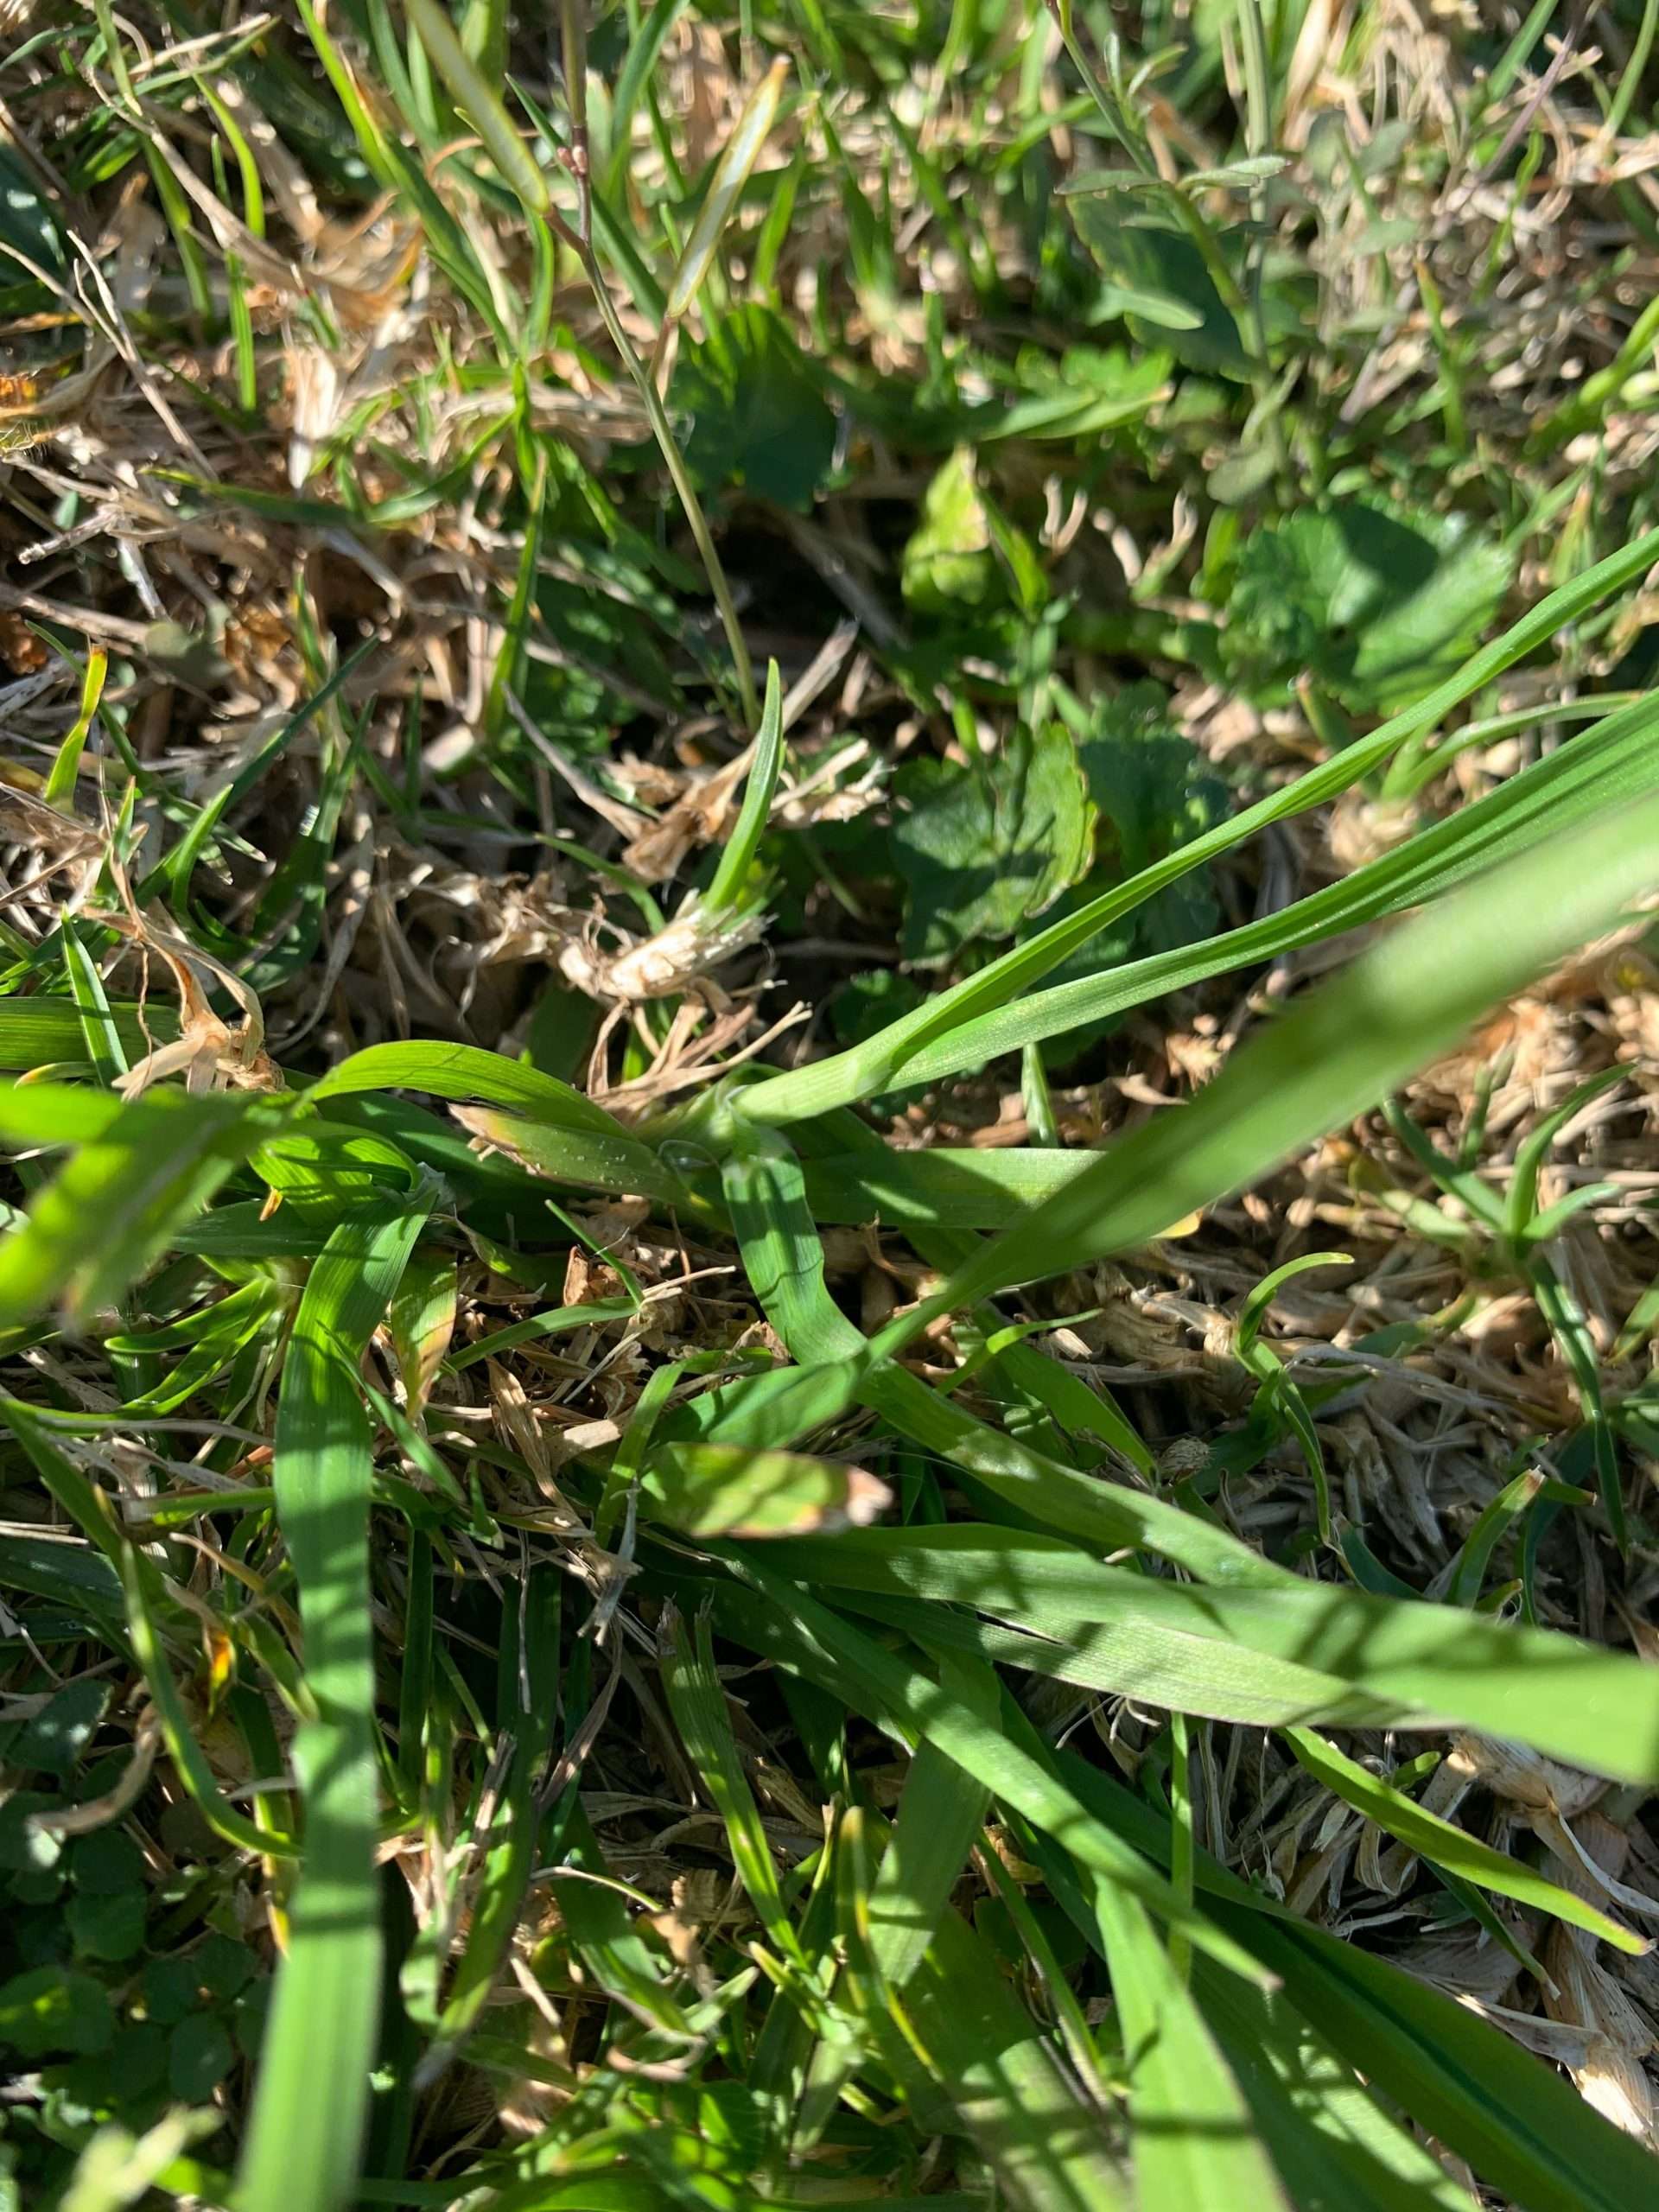 How to get rid of weeds in my lawn?